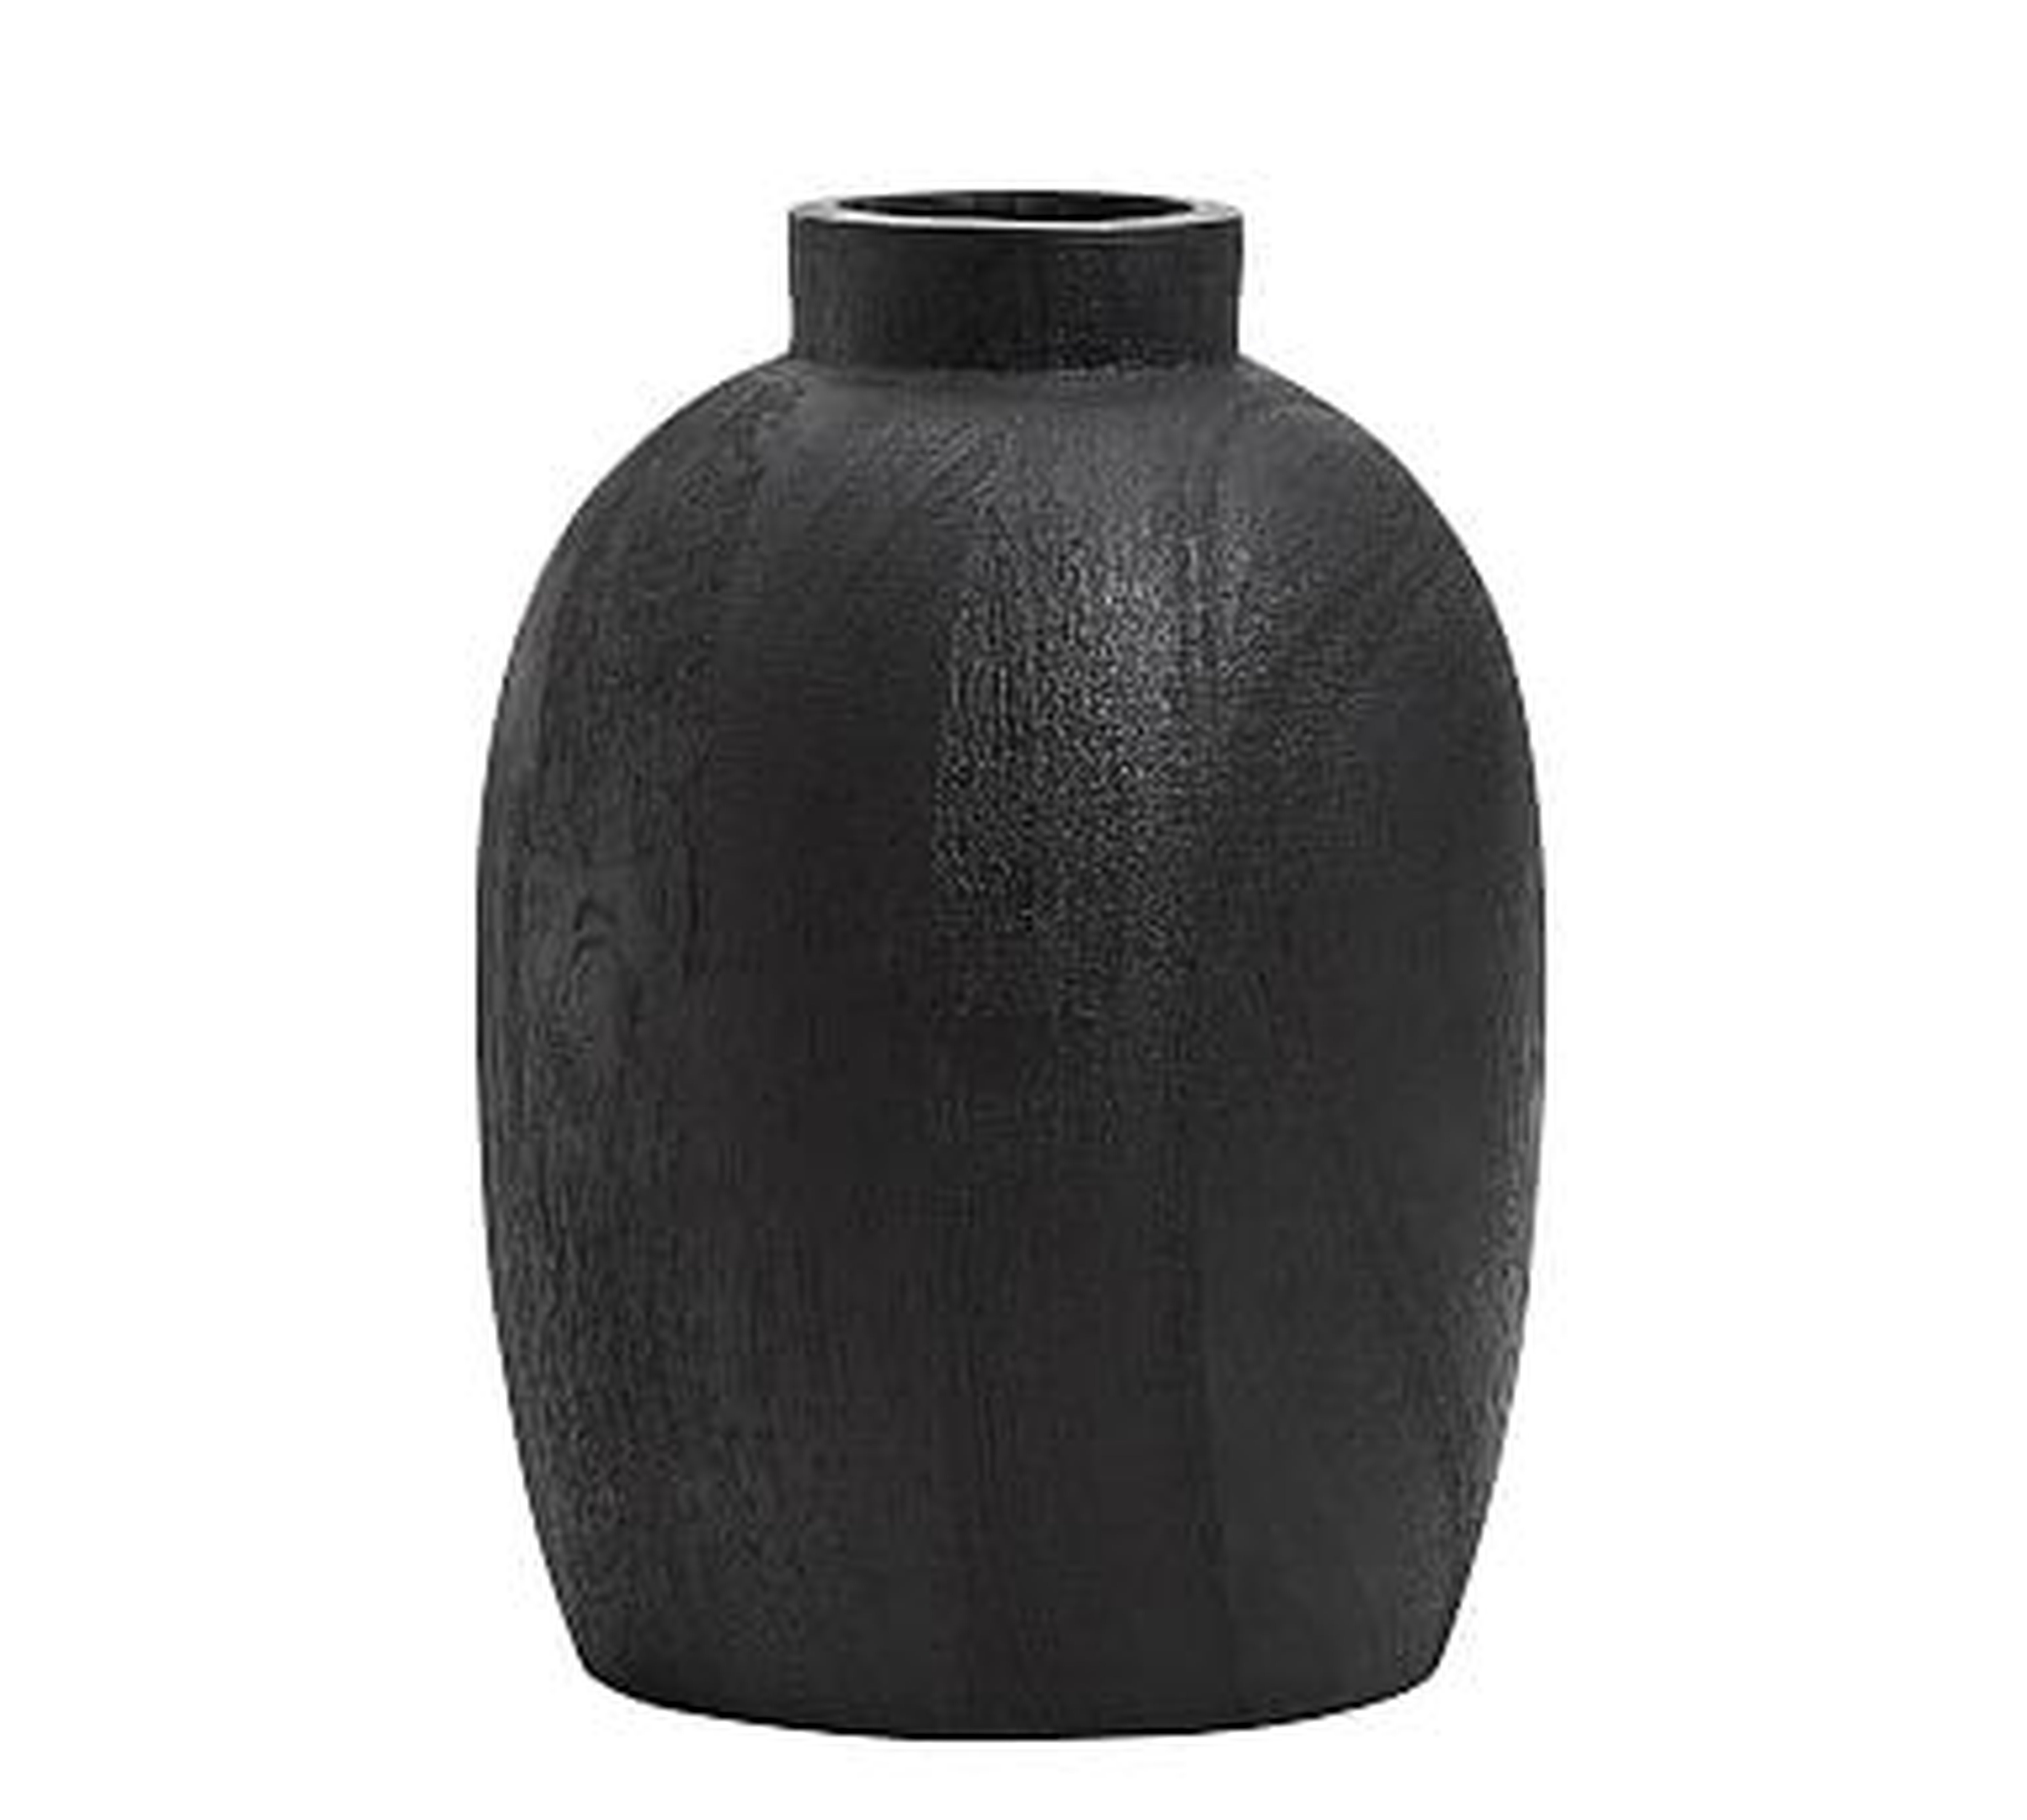 (DISCONTINUED) Burned Wooden Vase, Black, Small - Pottery Barn